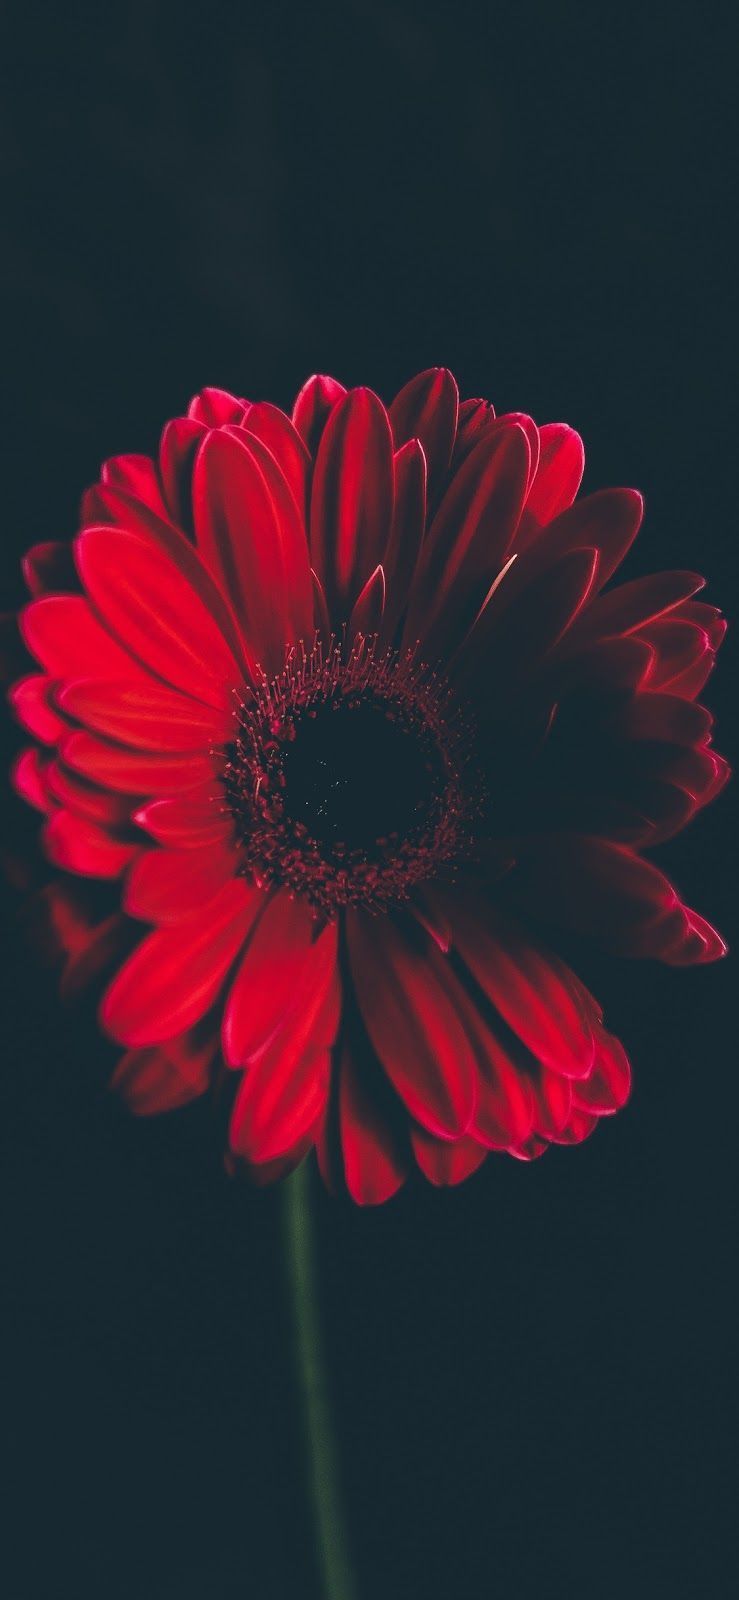 Red Flower iPhone Wallpaper Free Red Flower iPhone Background